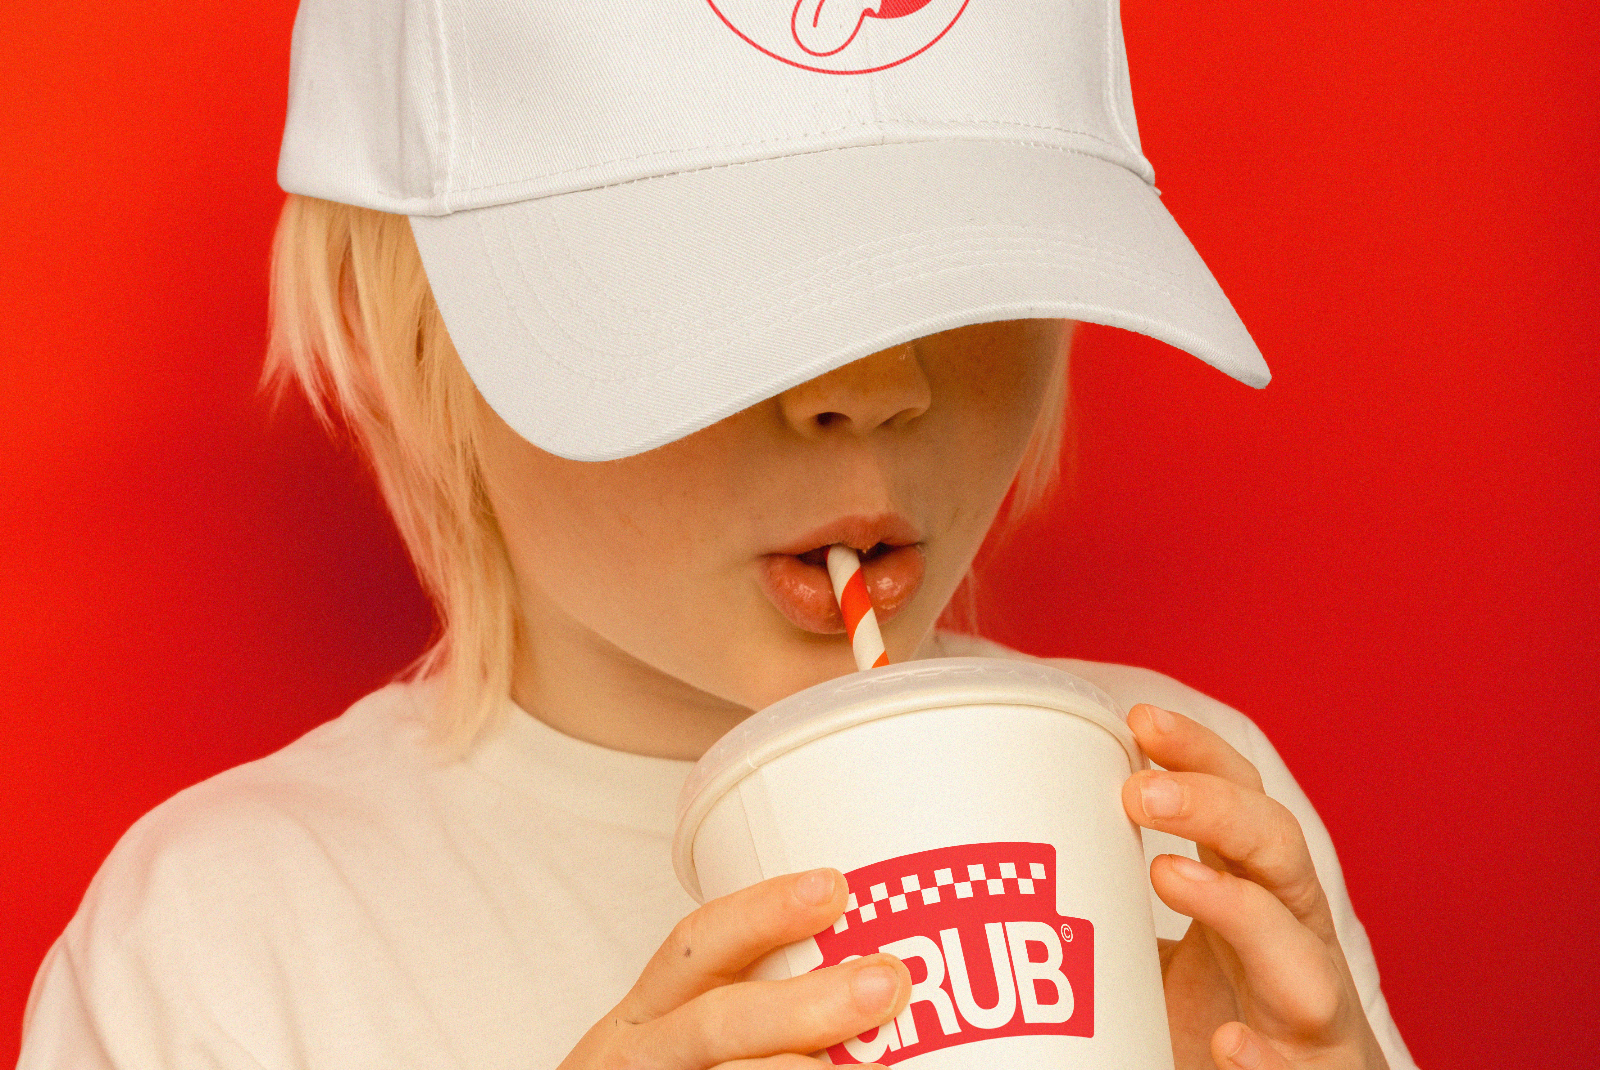 Child in white cap sipping from branded paper cup, red background, ideal for mockup, branding, marketing design templates.